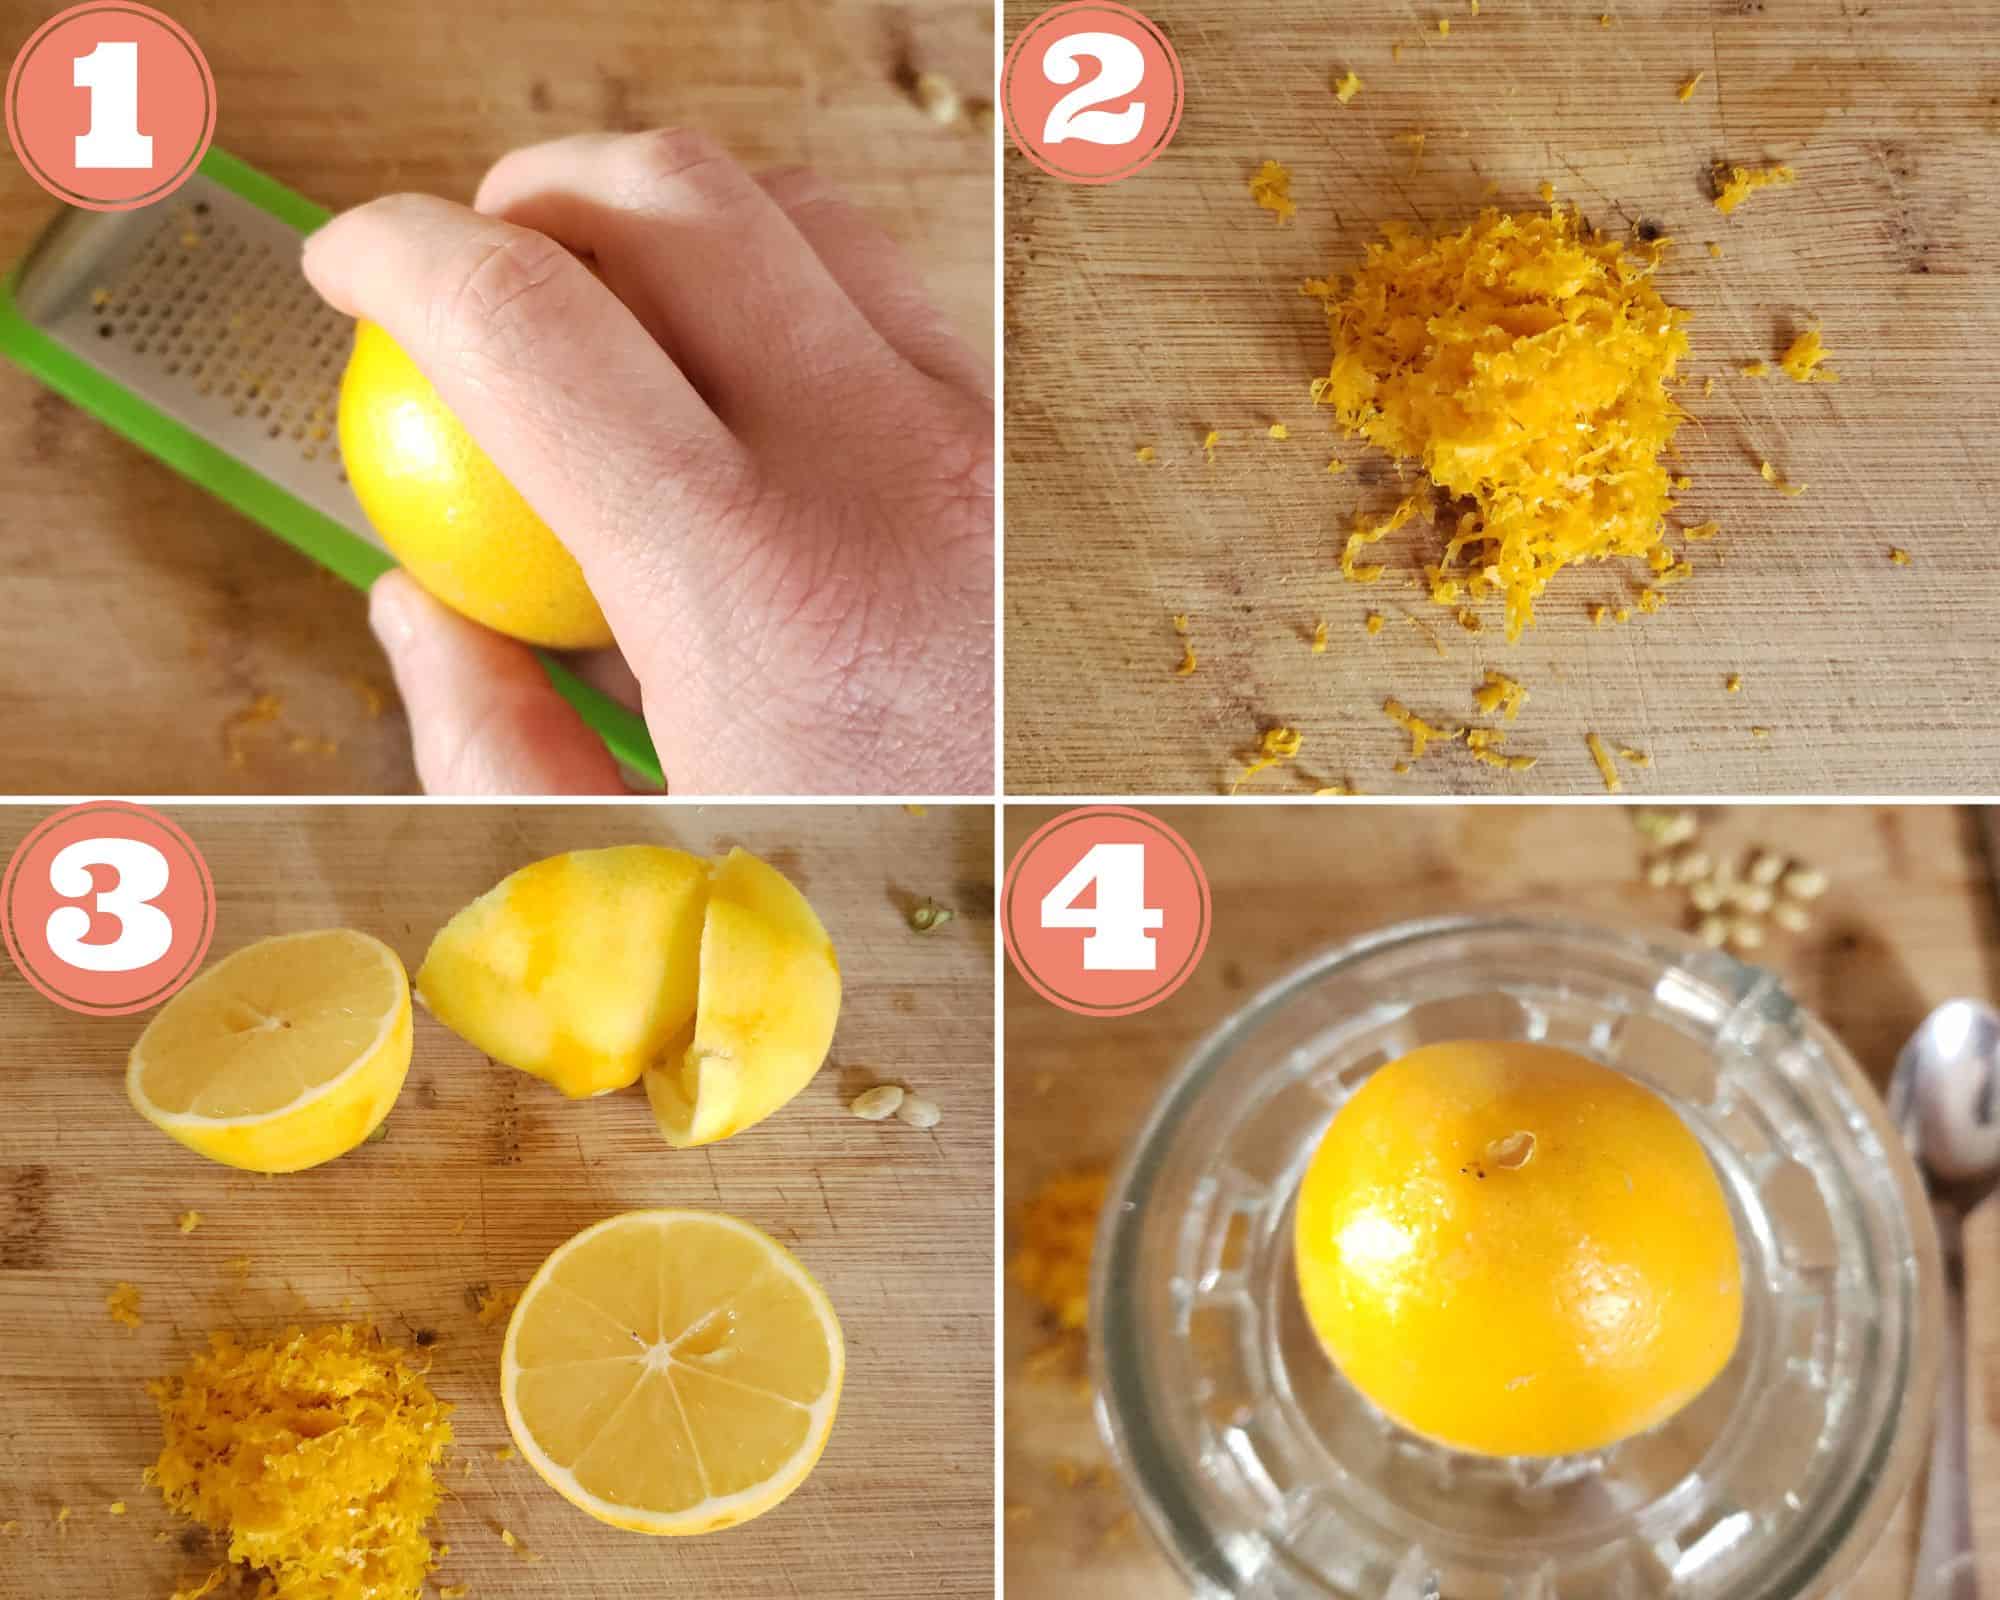 Photos showing how to juice and zest the lemons.